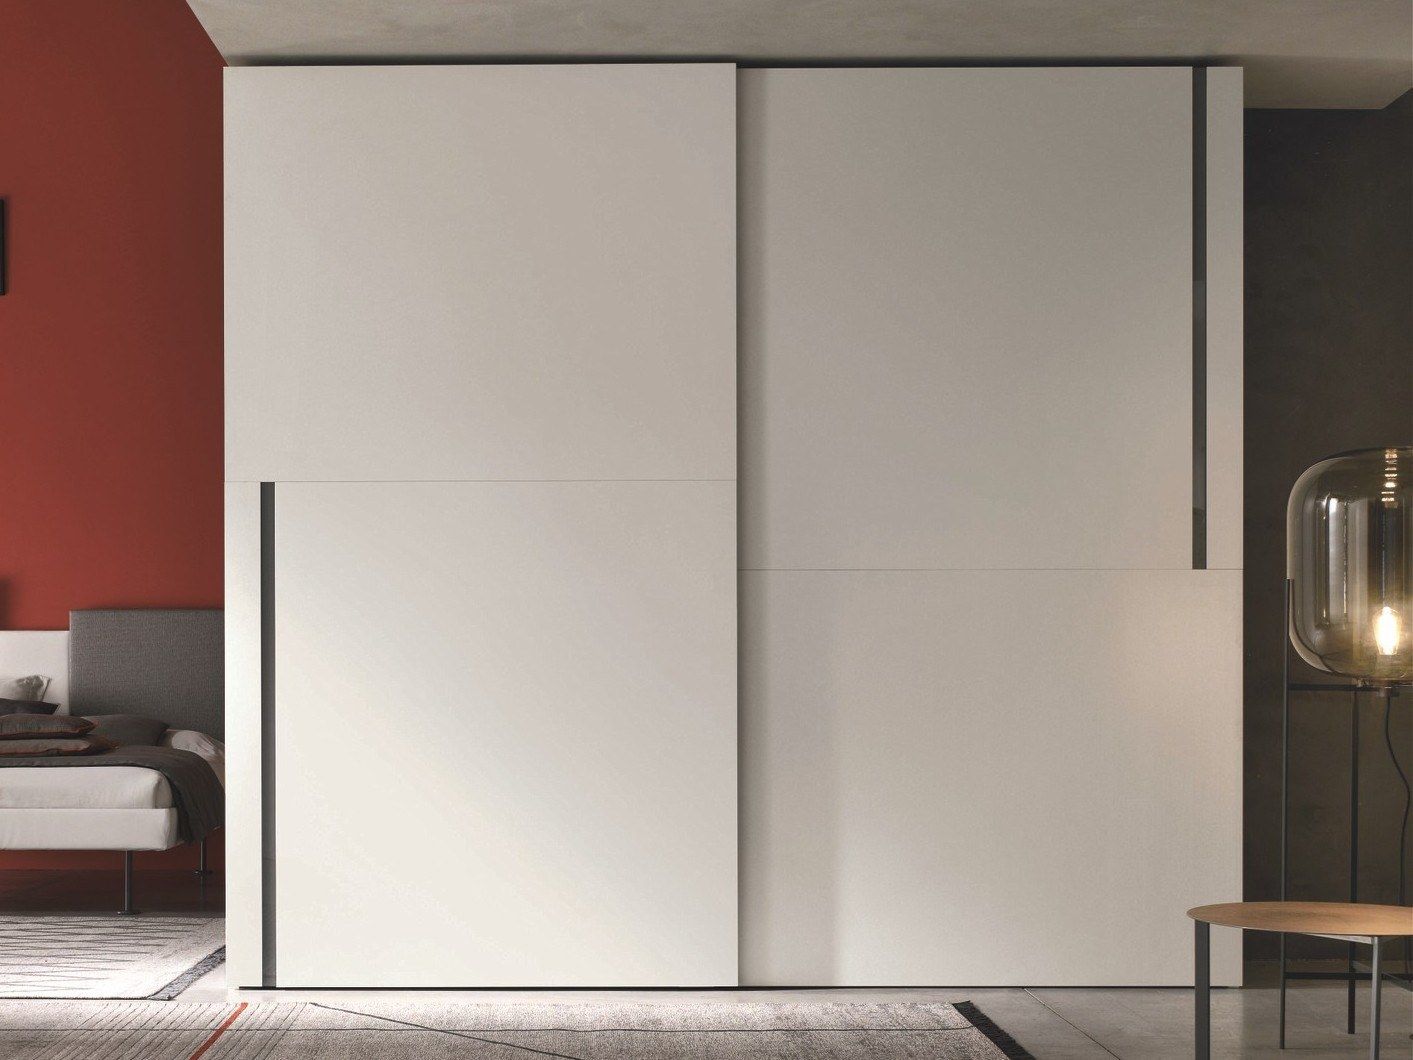 Sliding door wardrobe – an amazing place
to keep things